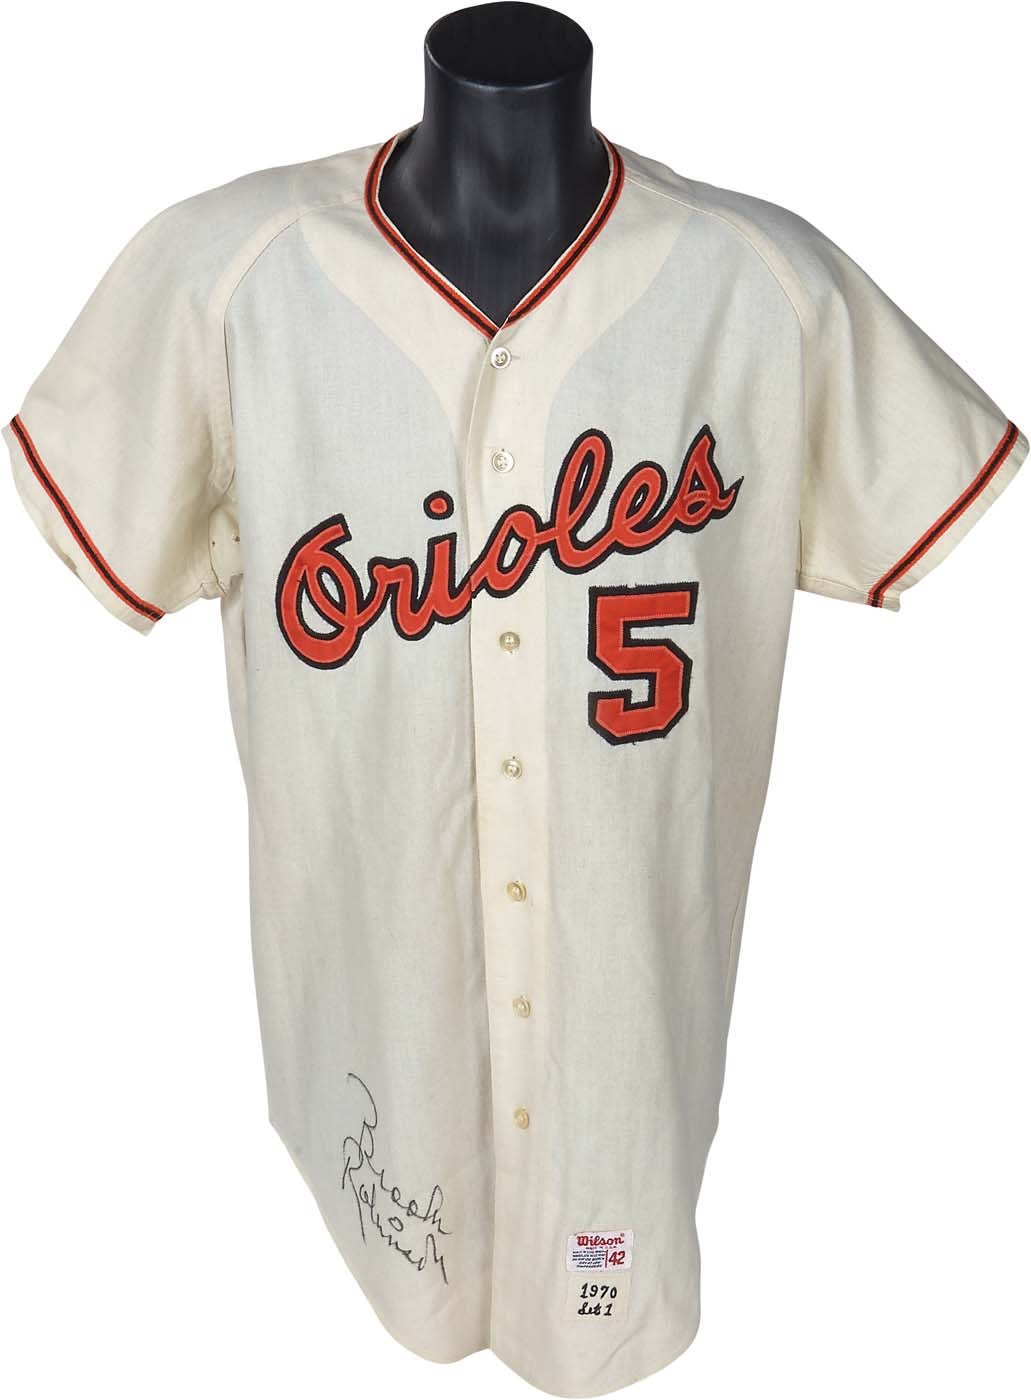 Baseball Equipment - 1970 World Series Brooks Robinson Baltimore Orioles Game Worn Jersey - Photo-Matched (MEARS 10)